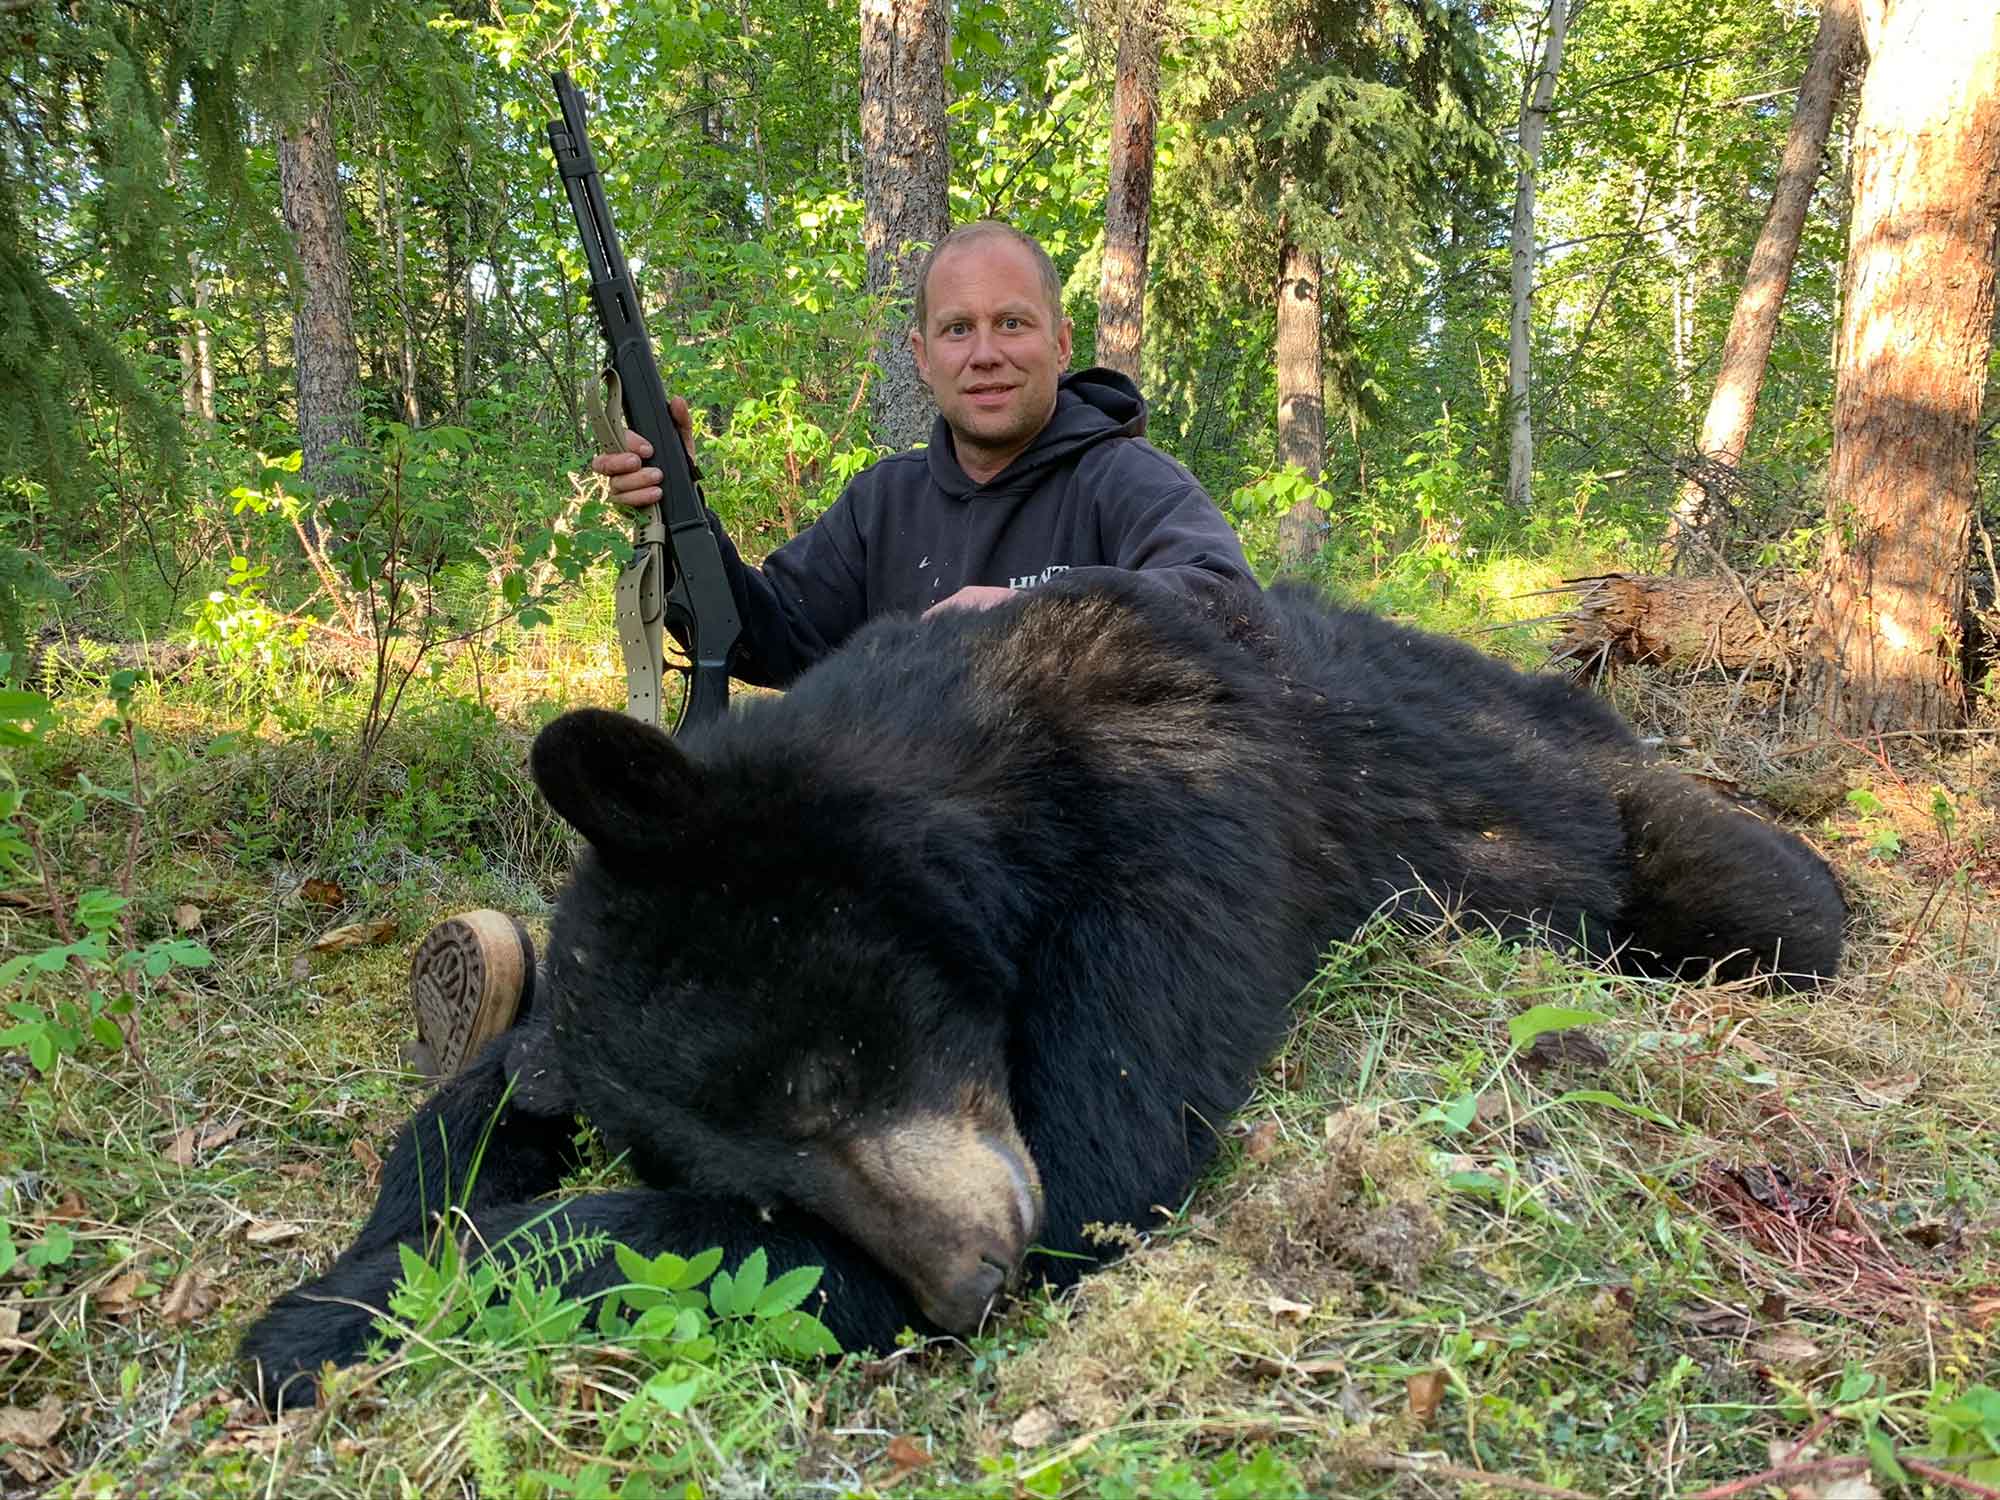 This bear was taken with a .45/70 lever gun after the boar peaked its head out from behind some cribbing.